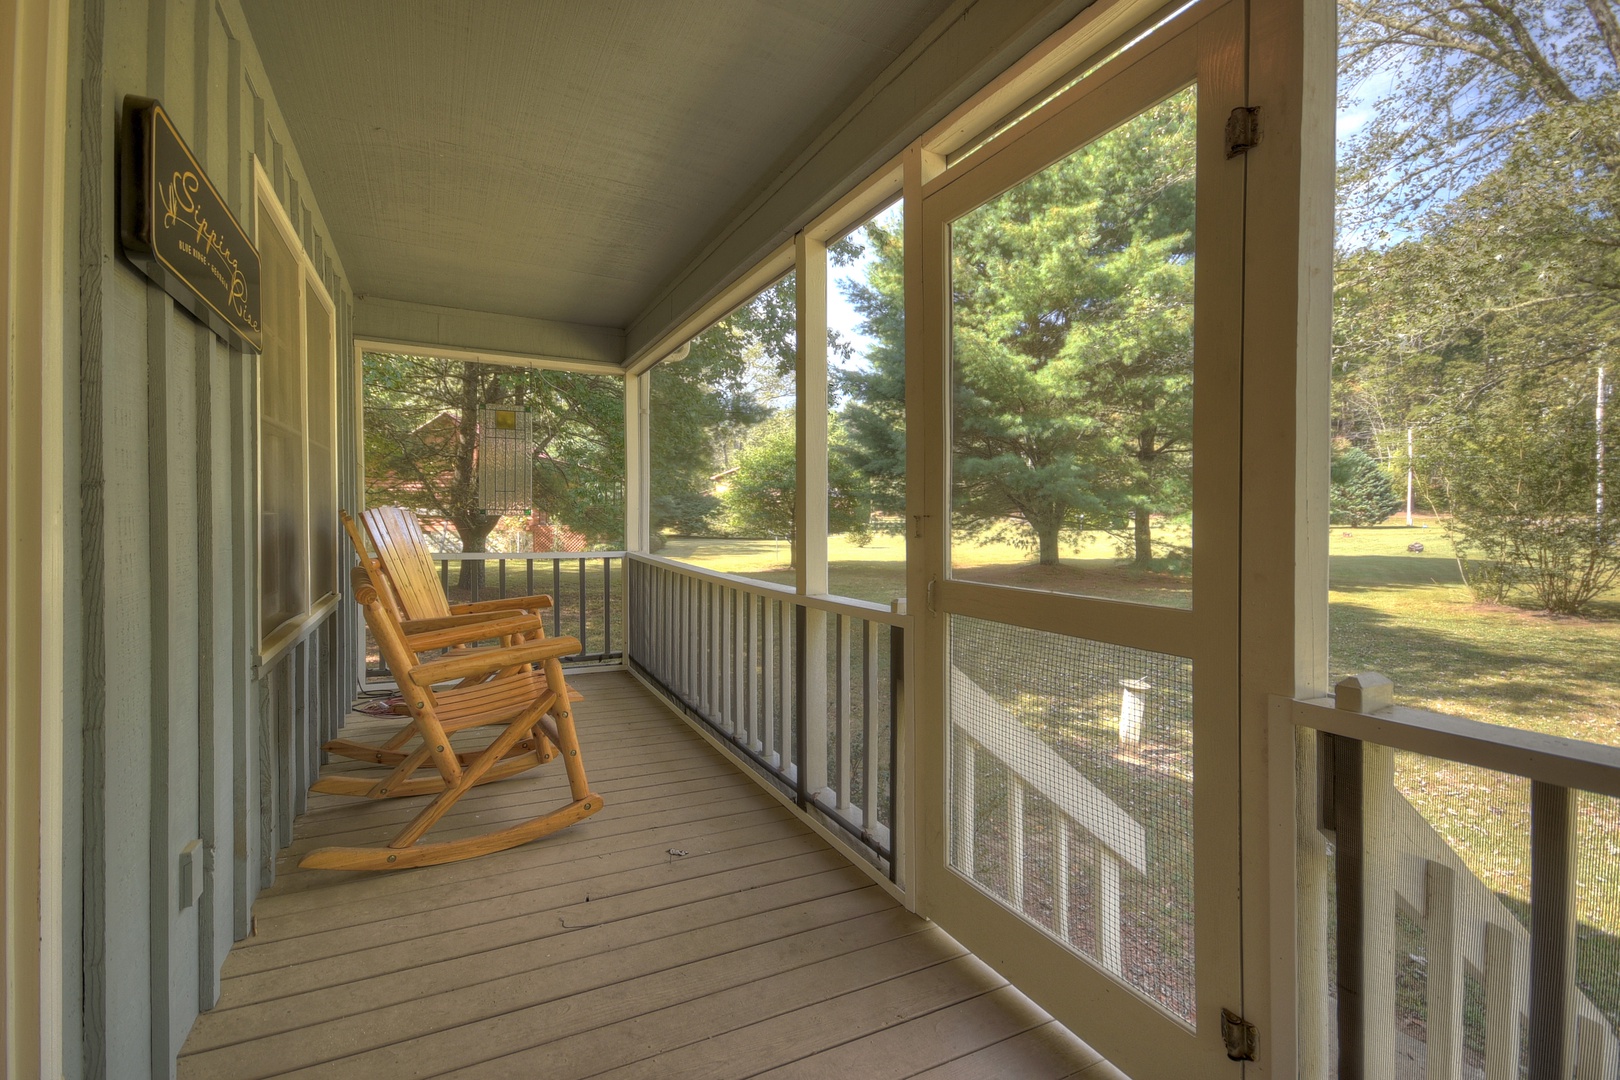 Sipping Rise- Front screened in porch area with rocking chairs